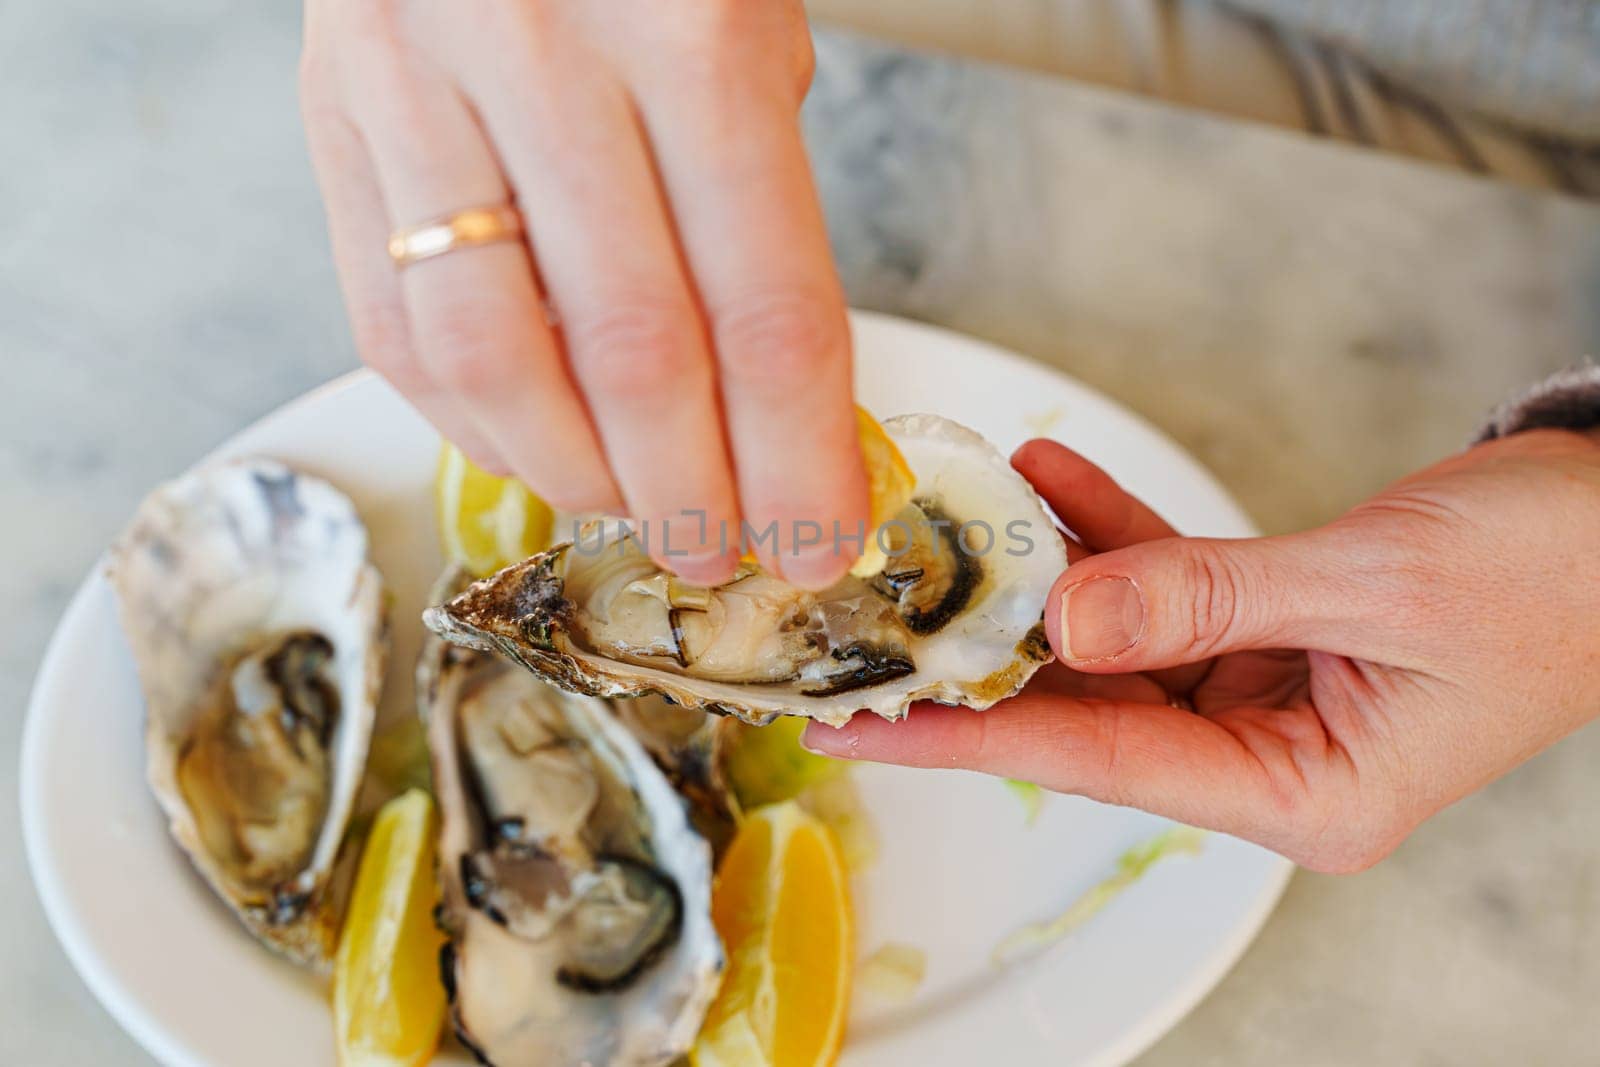 Girl enjoying gourmet delicacy with oysters, lemons, and silver utensils at outdoor dining event by PhotoTime